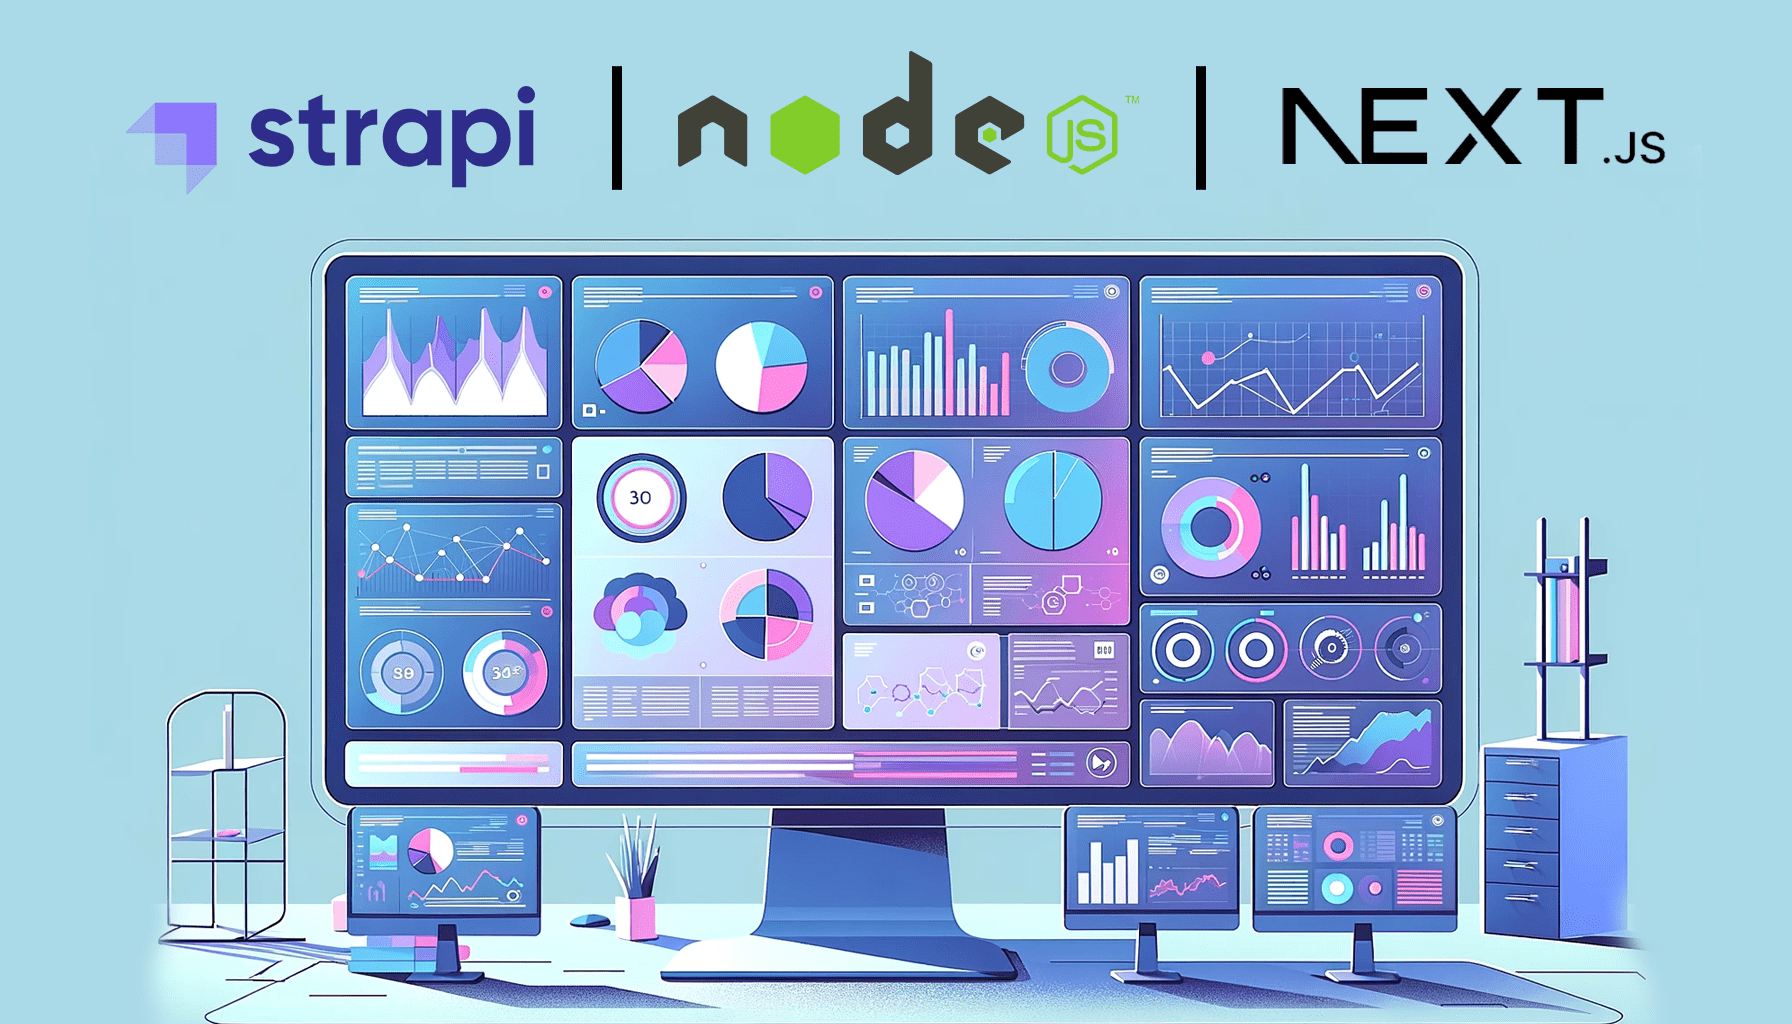 Building Interactive Dashboards with Strapi, Node and Next